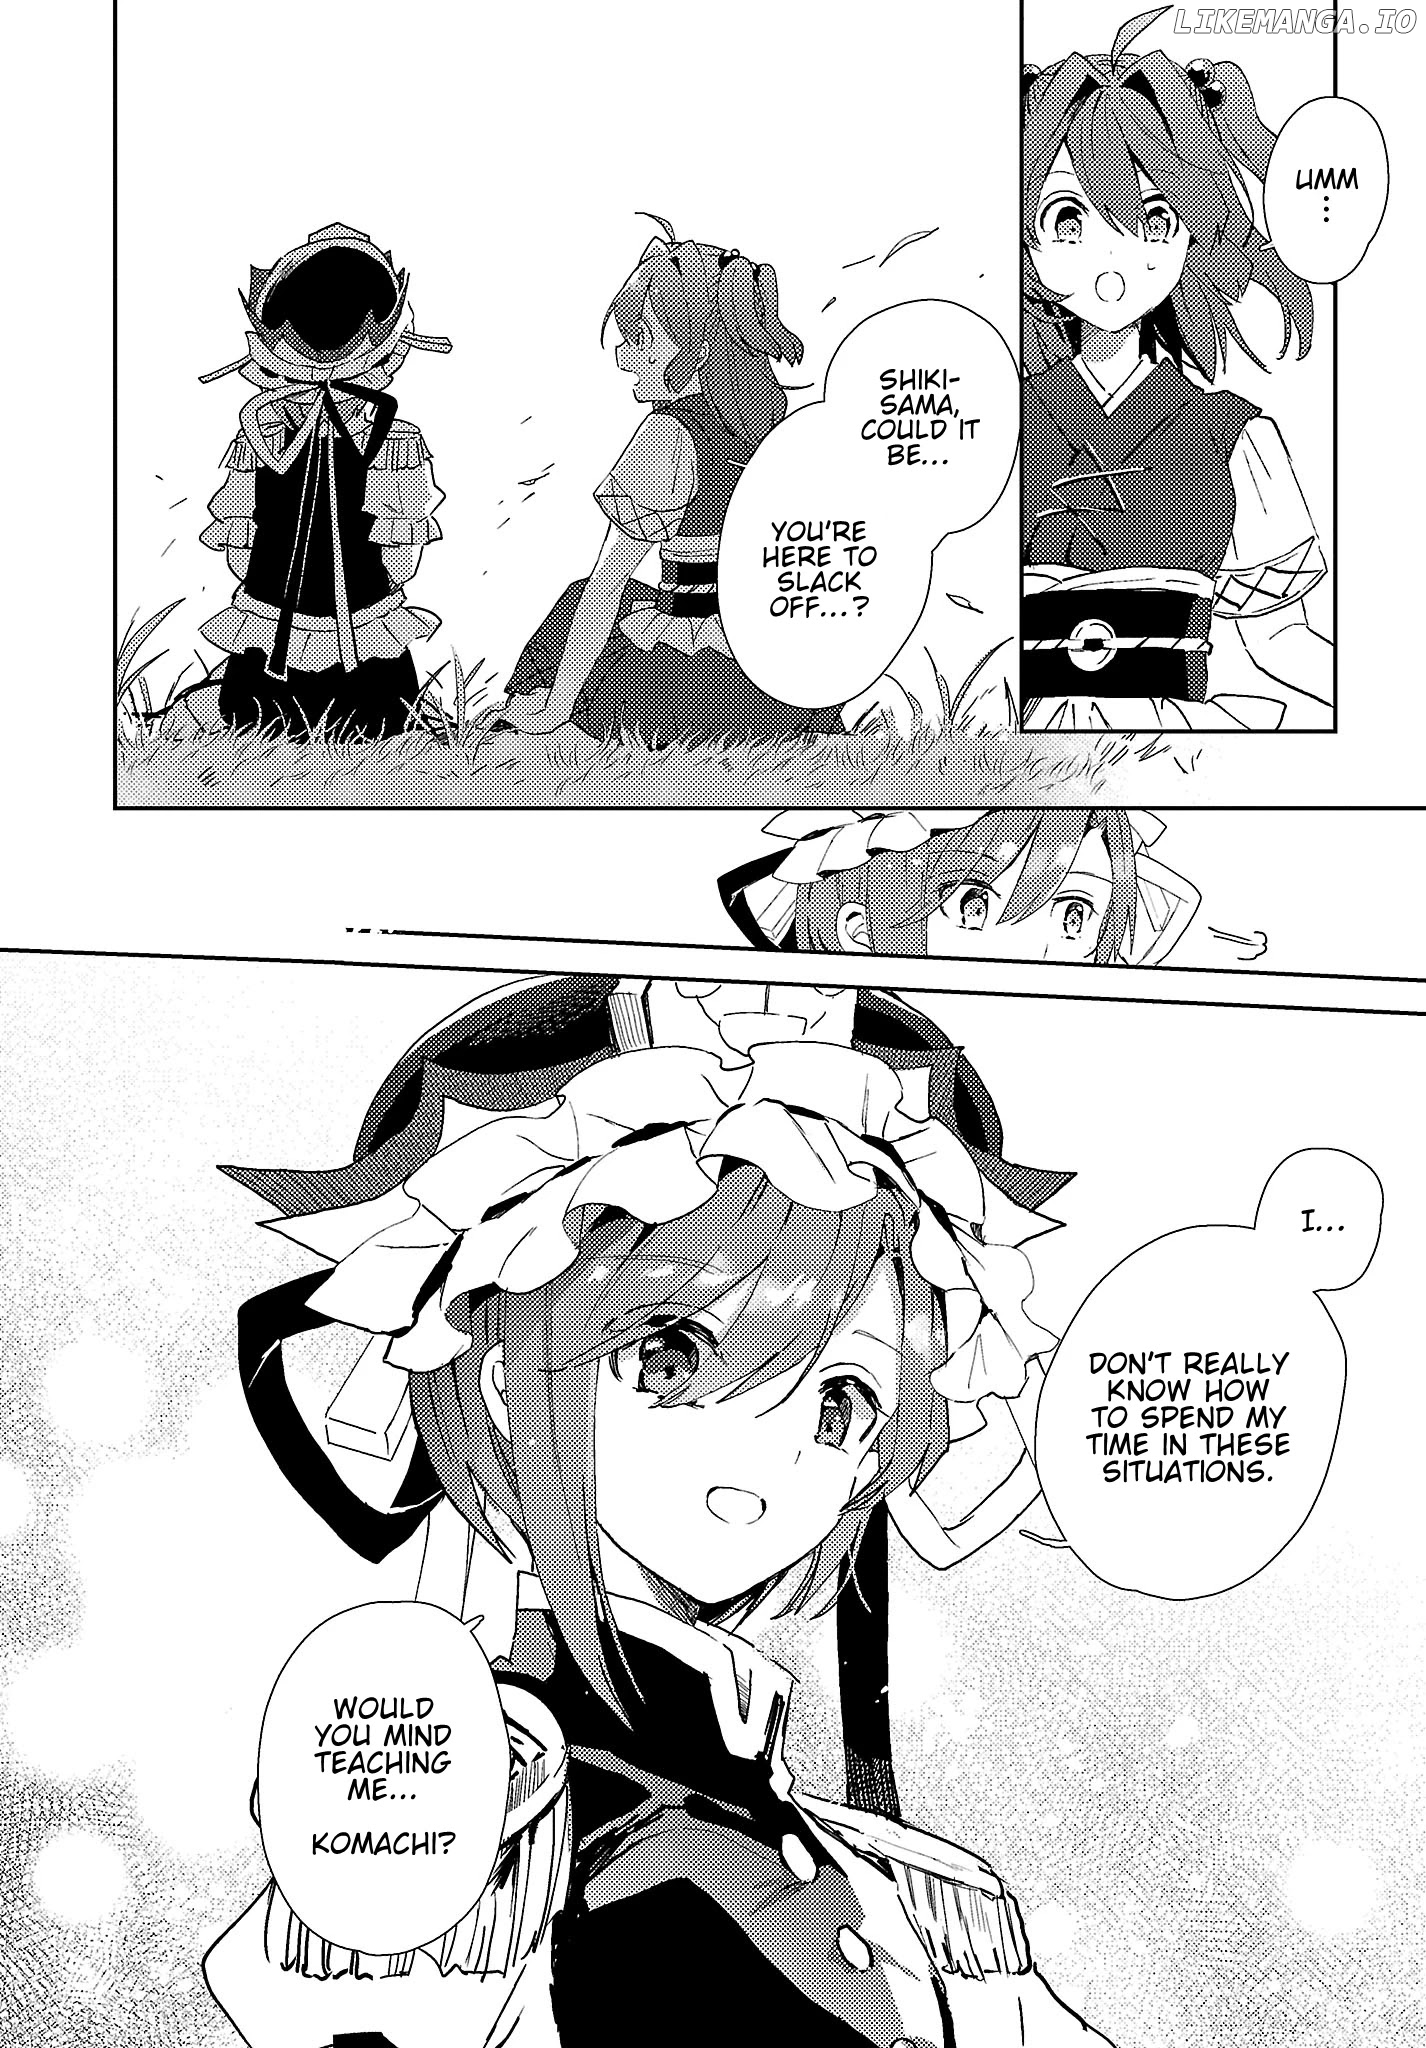 The Shinigami's Rowing Her Boat as Usual - Touhou chapter 6 - page 18